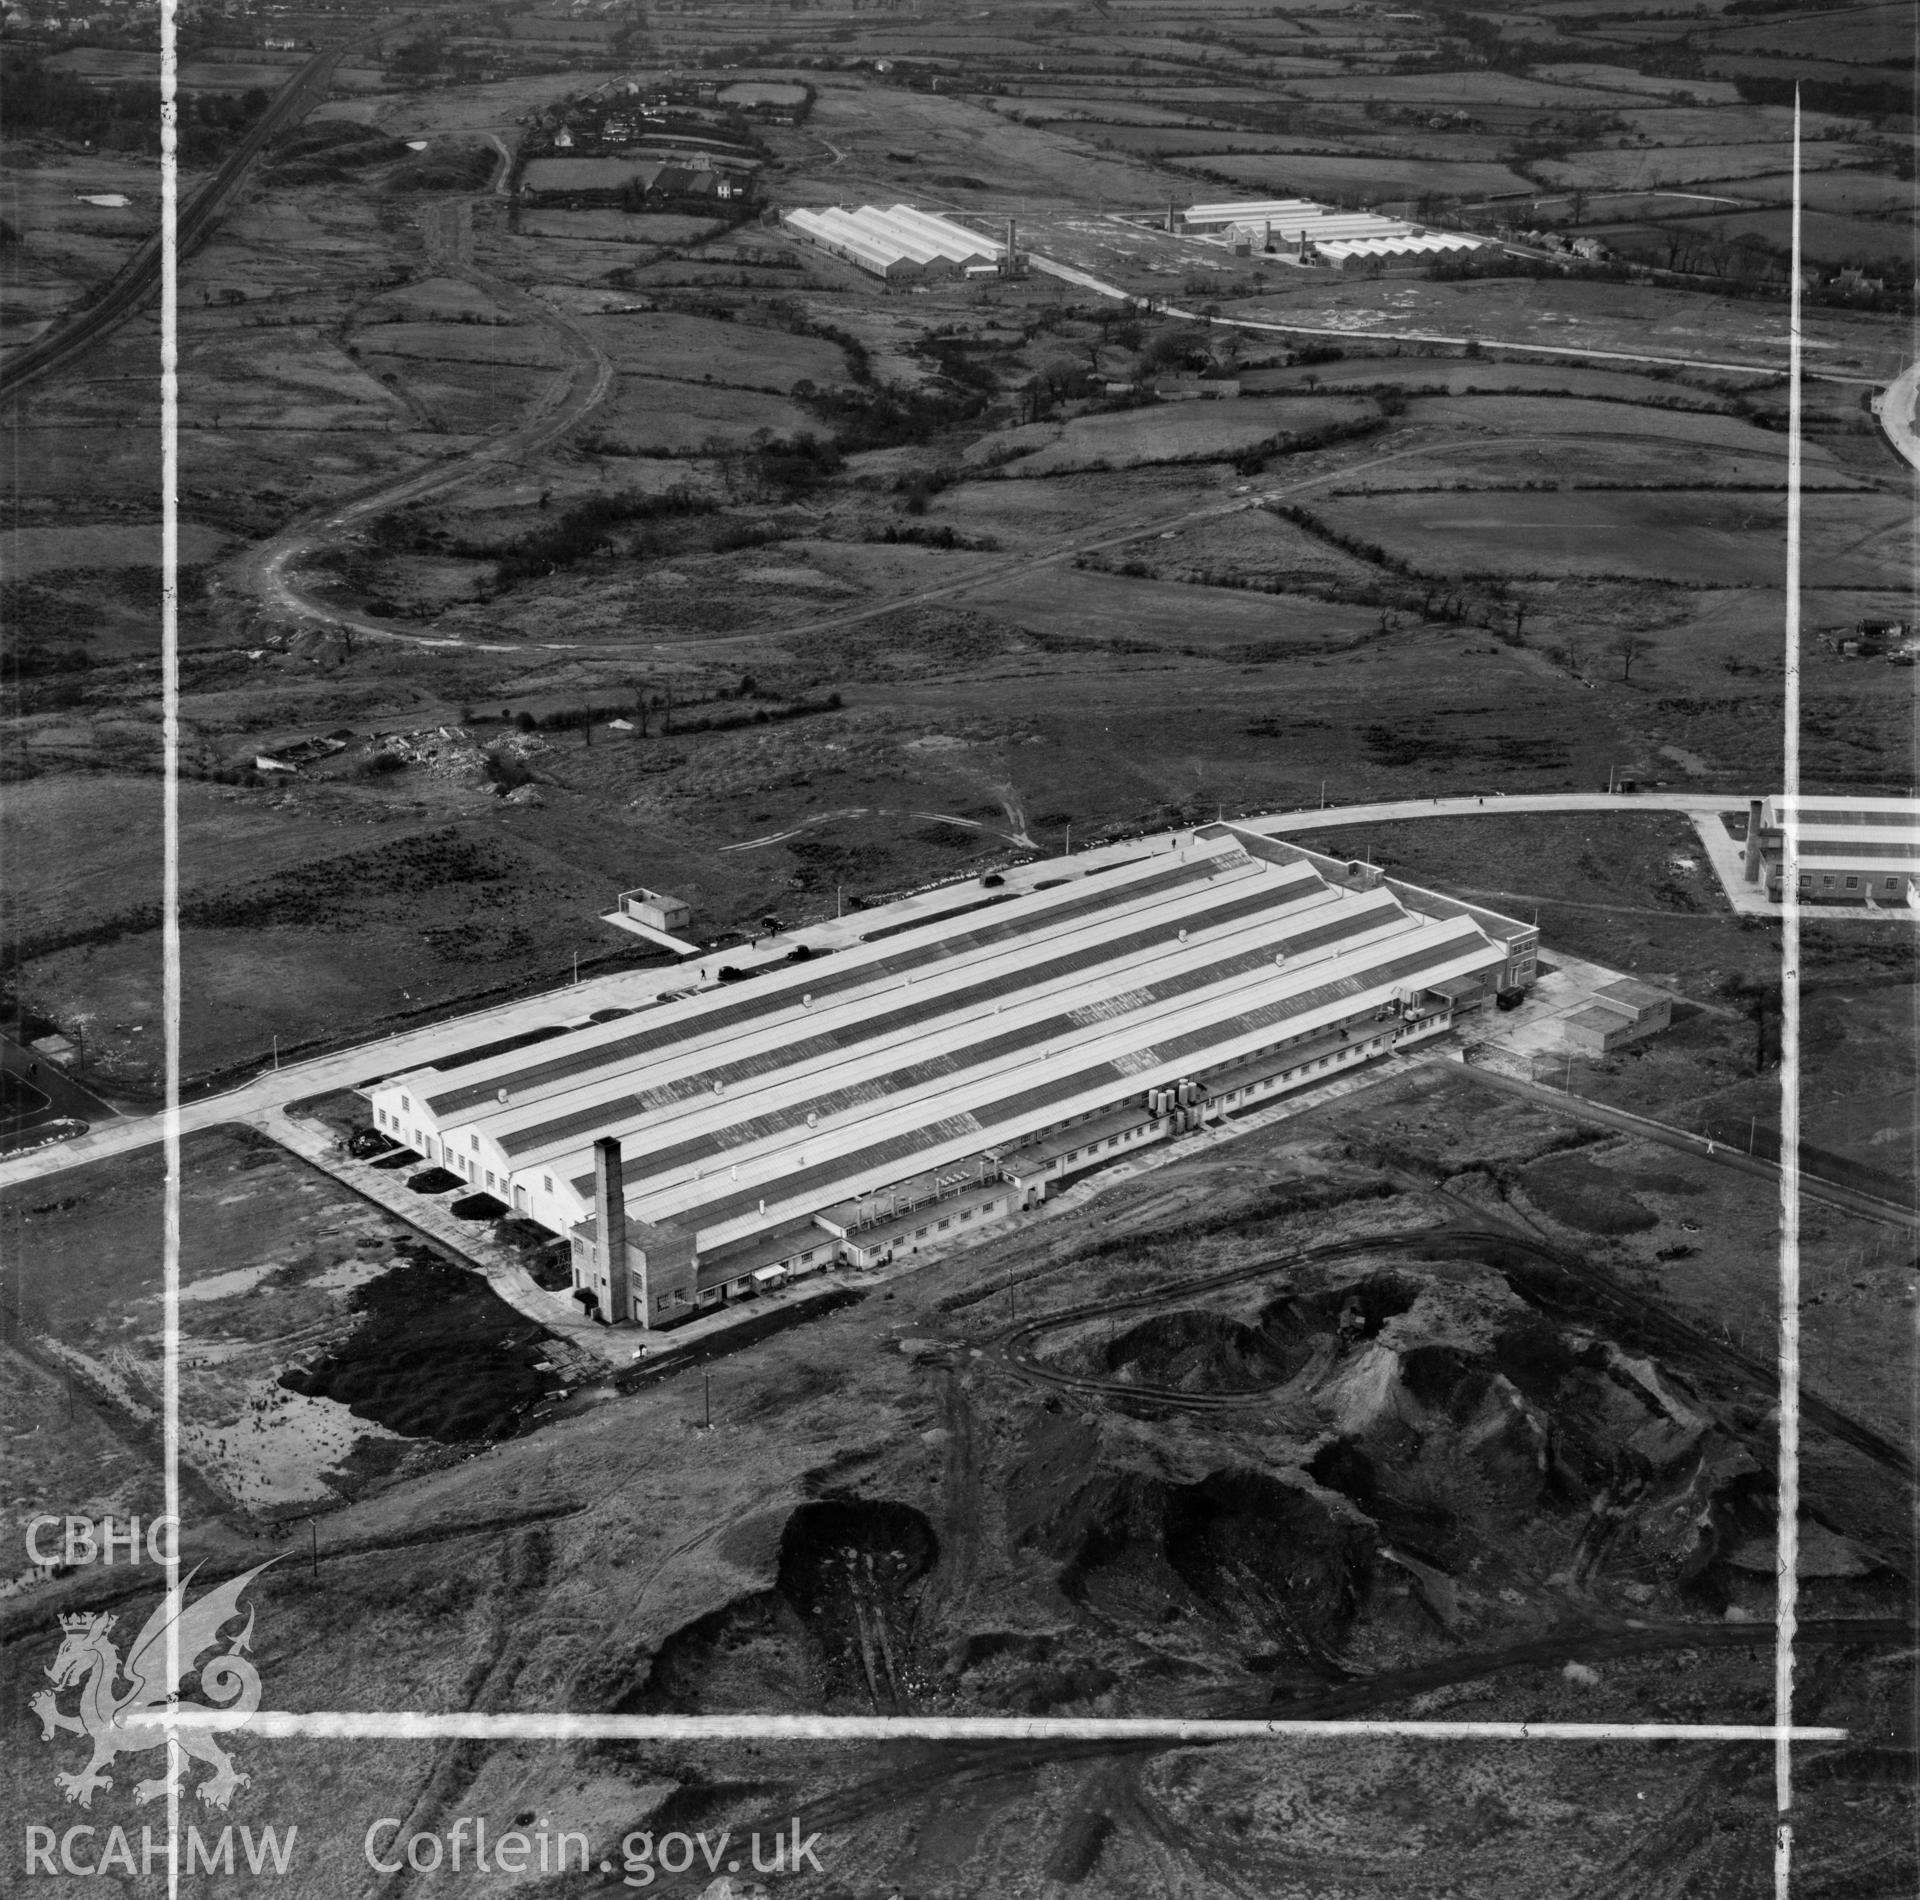 View of Mettoy factory, Fforestfach showing building 'W'